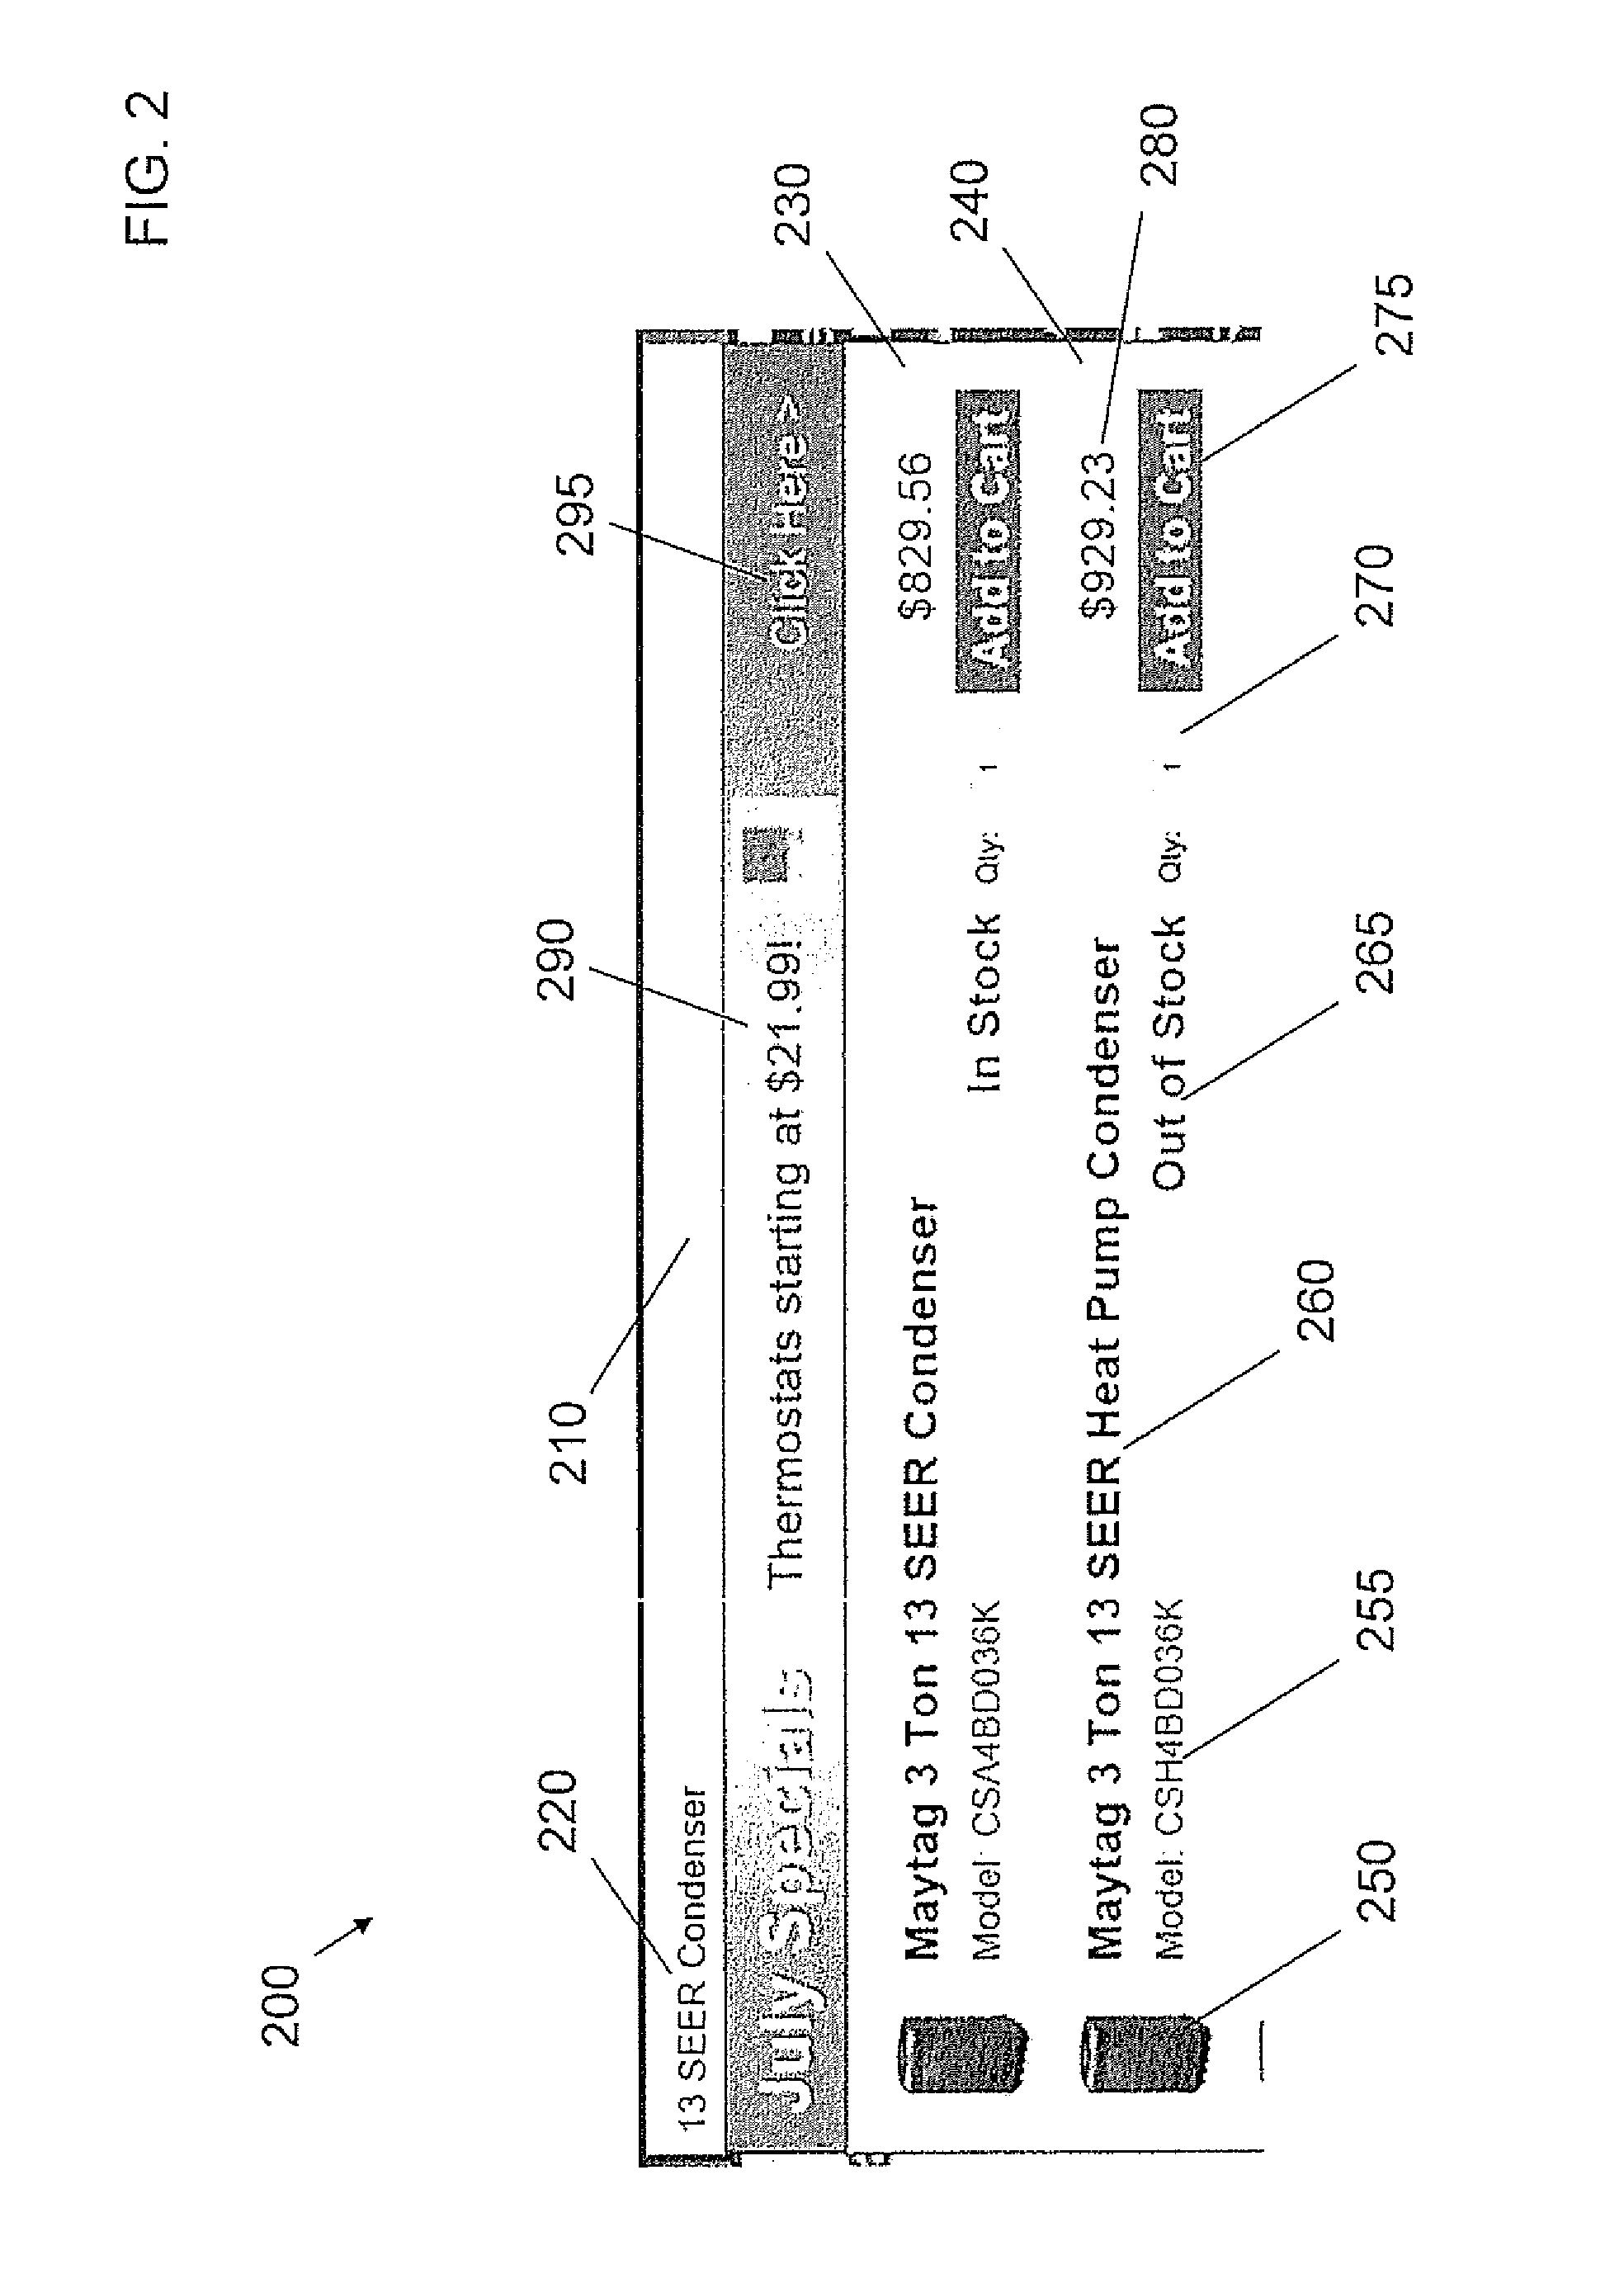 System and method of electronic searching and shopping carts